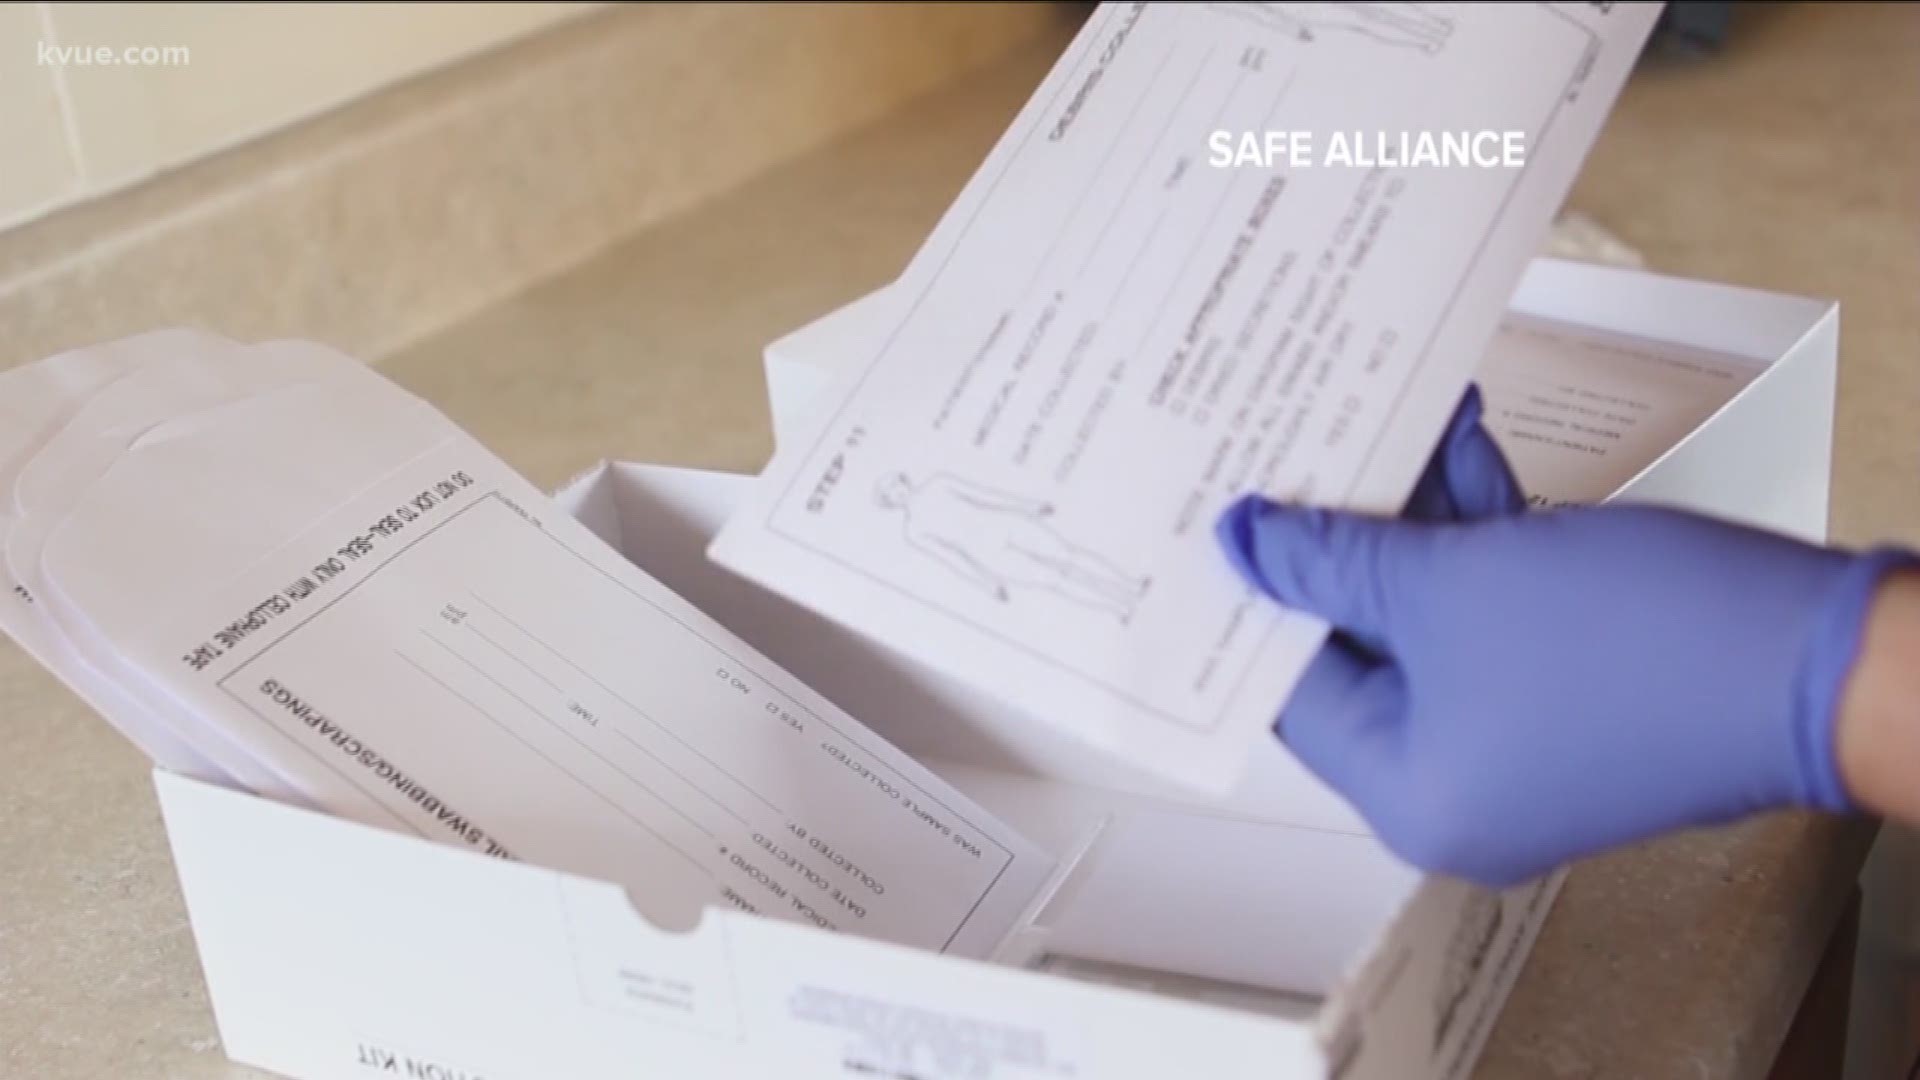 With the news that Austin police have cleared the backlog of untested rape kits, a group that helps abuse survivors is focusing on the impact that is having on victims.